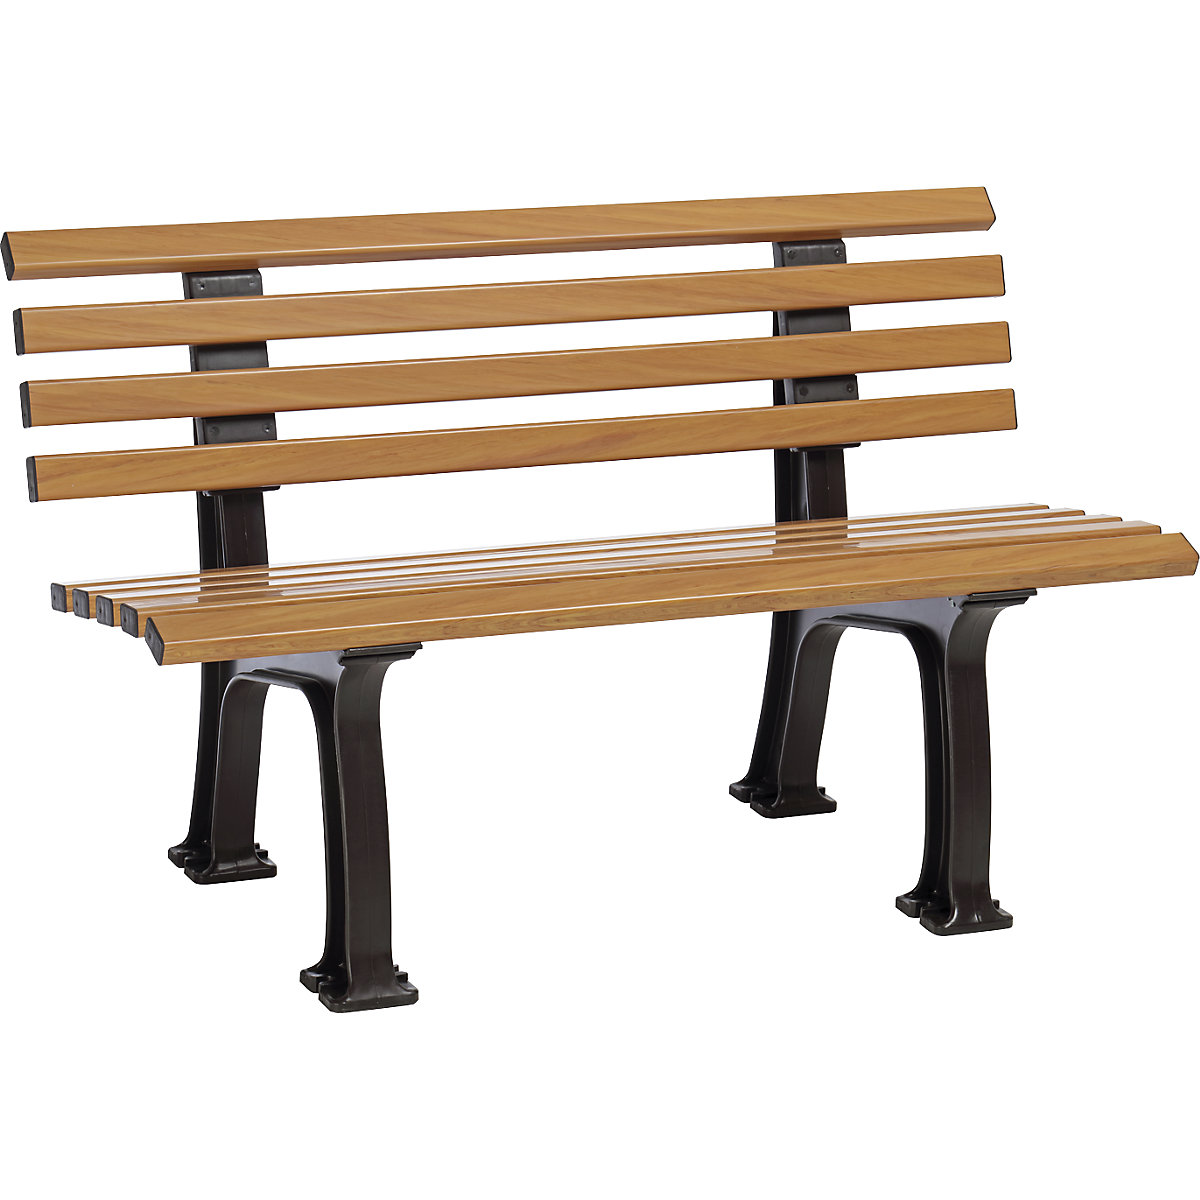 Park bench made of plastic, with 9 slats, width 1200 mm, wood finish-11